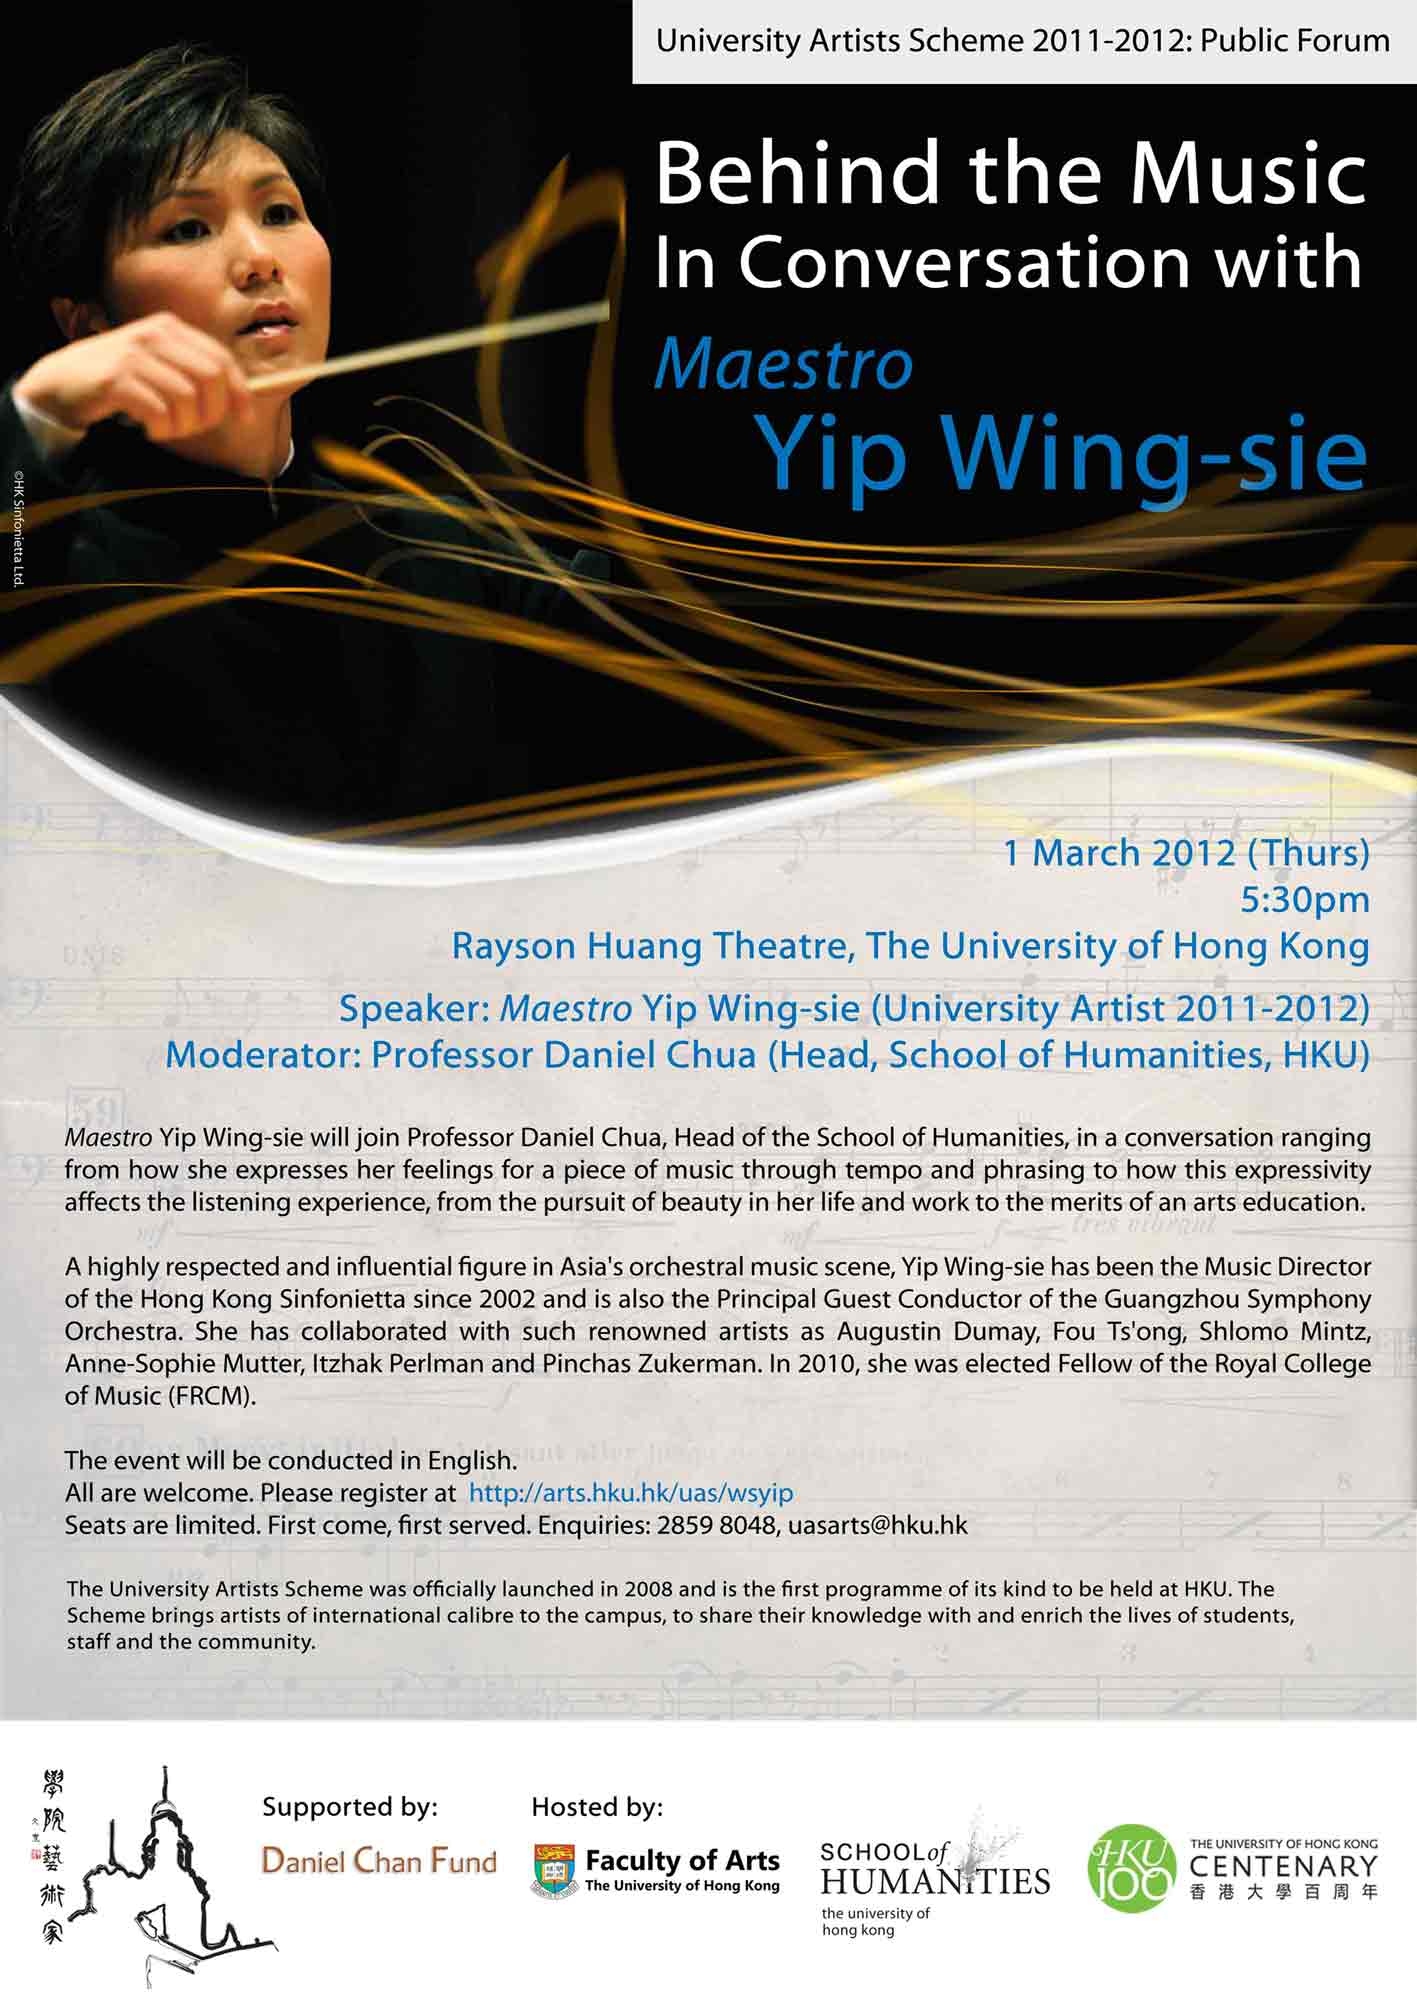 Maestro Yip Wing-sie will join Professor Daniel Chua, Head of the School of Humanities, in a conversation ranging from how she expresses her feelings for a piece of music through tempo and phrasing to how this expressivity affects the listening exper